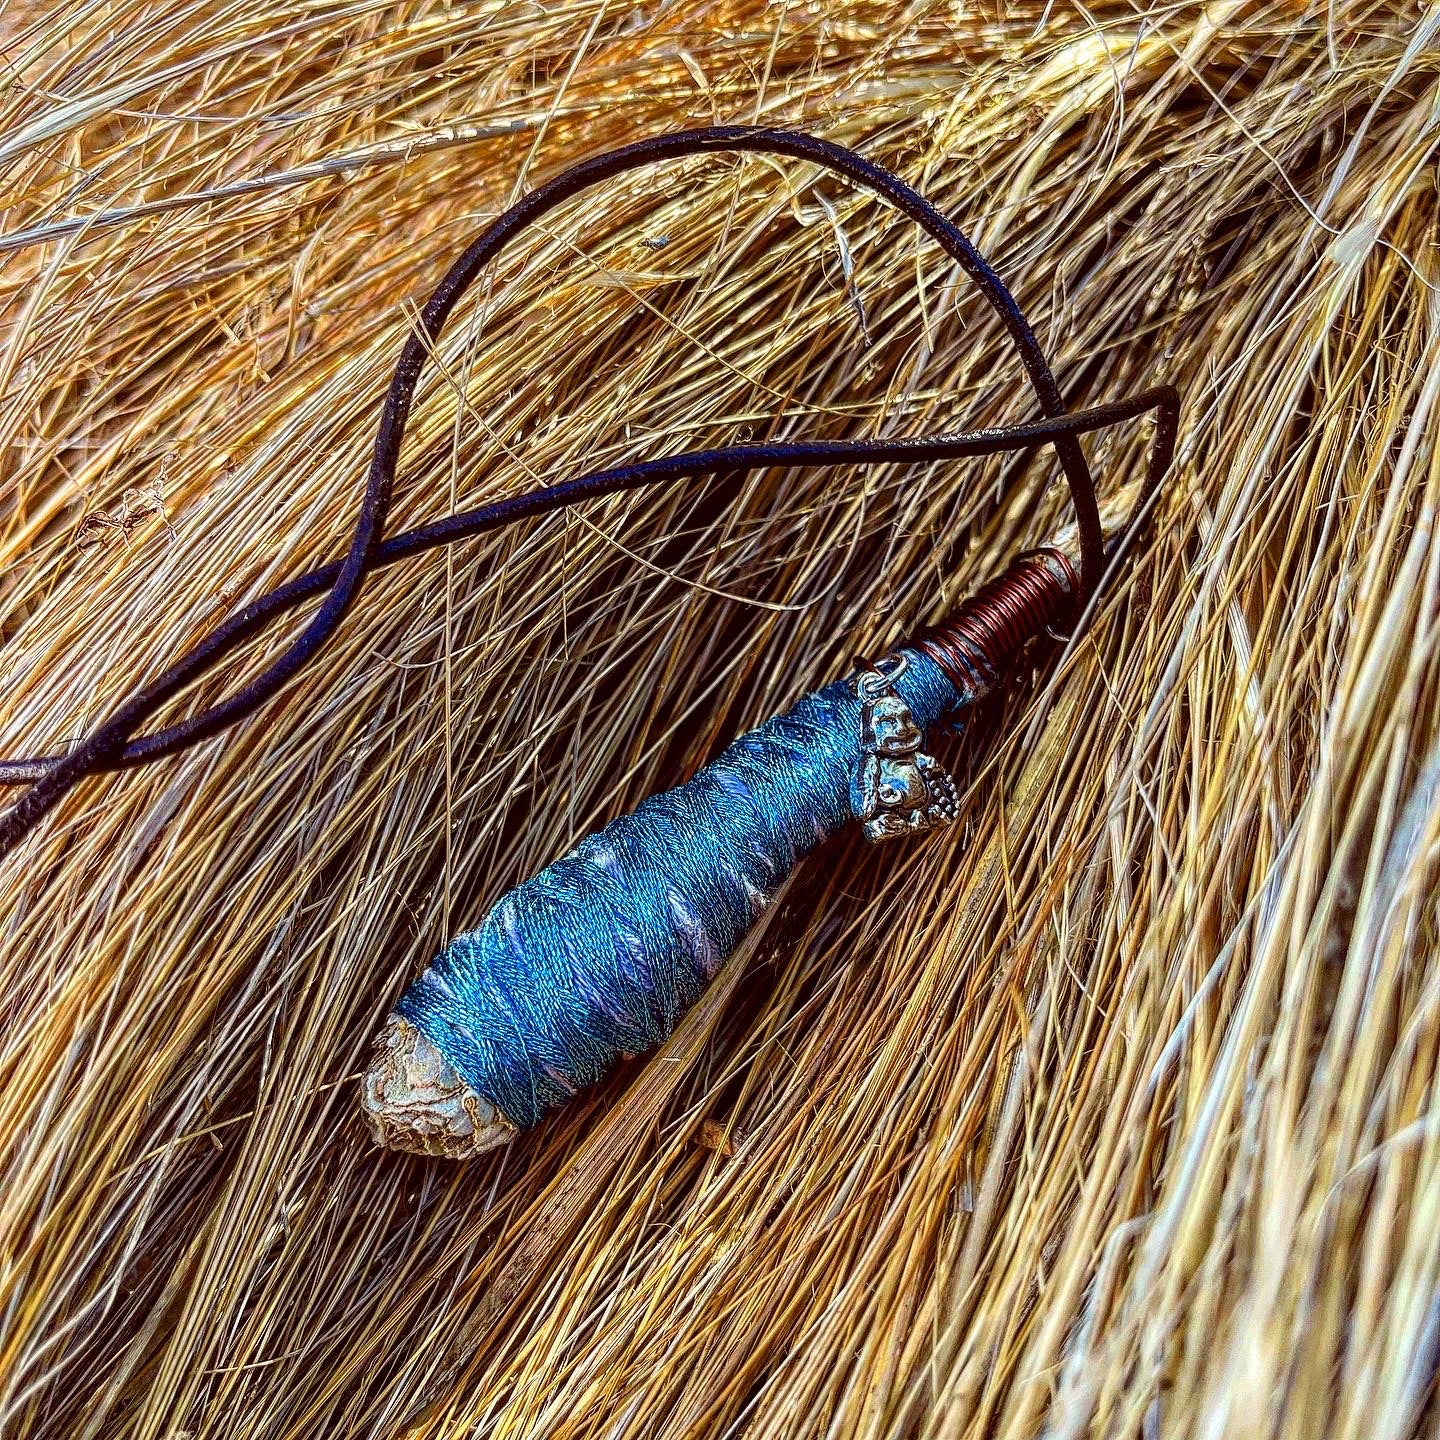 Sparkle Baby Blue sage necklace pendant, this is a photo of Sage jewelry made by Paul Adrian Moon, this specific sage piece has a mini silver sitting buddha Pendant, Paul Adrian Moon is also a photographer in Southern California and graphic artist, traveling and wrapping Sage necklaces along his journey, making portable smudging sage wear. REAL White sage nnecklaces, candles, wire wrapping Sage, pendants, crystals and more. Burnable Sage. Handmade and natural jewelry 